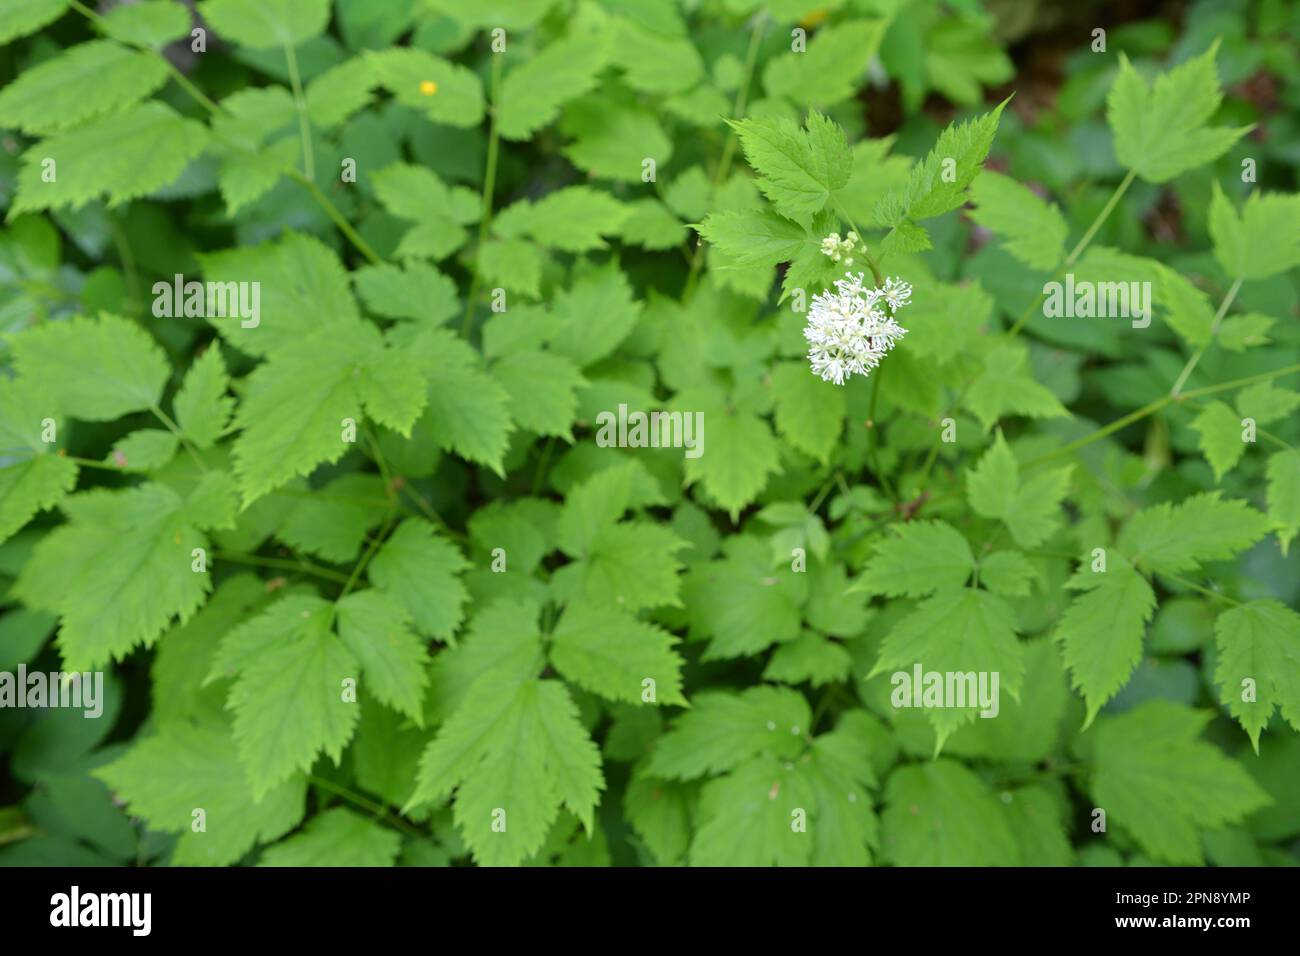 Perennial, rare, poisonous plant Actaea spicata grows in the wild in the woods Stock Photo